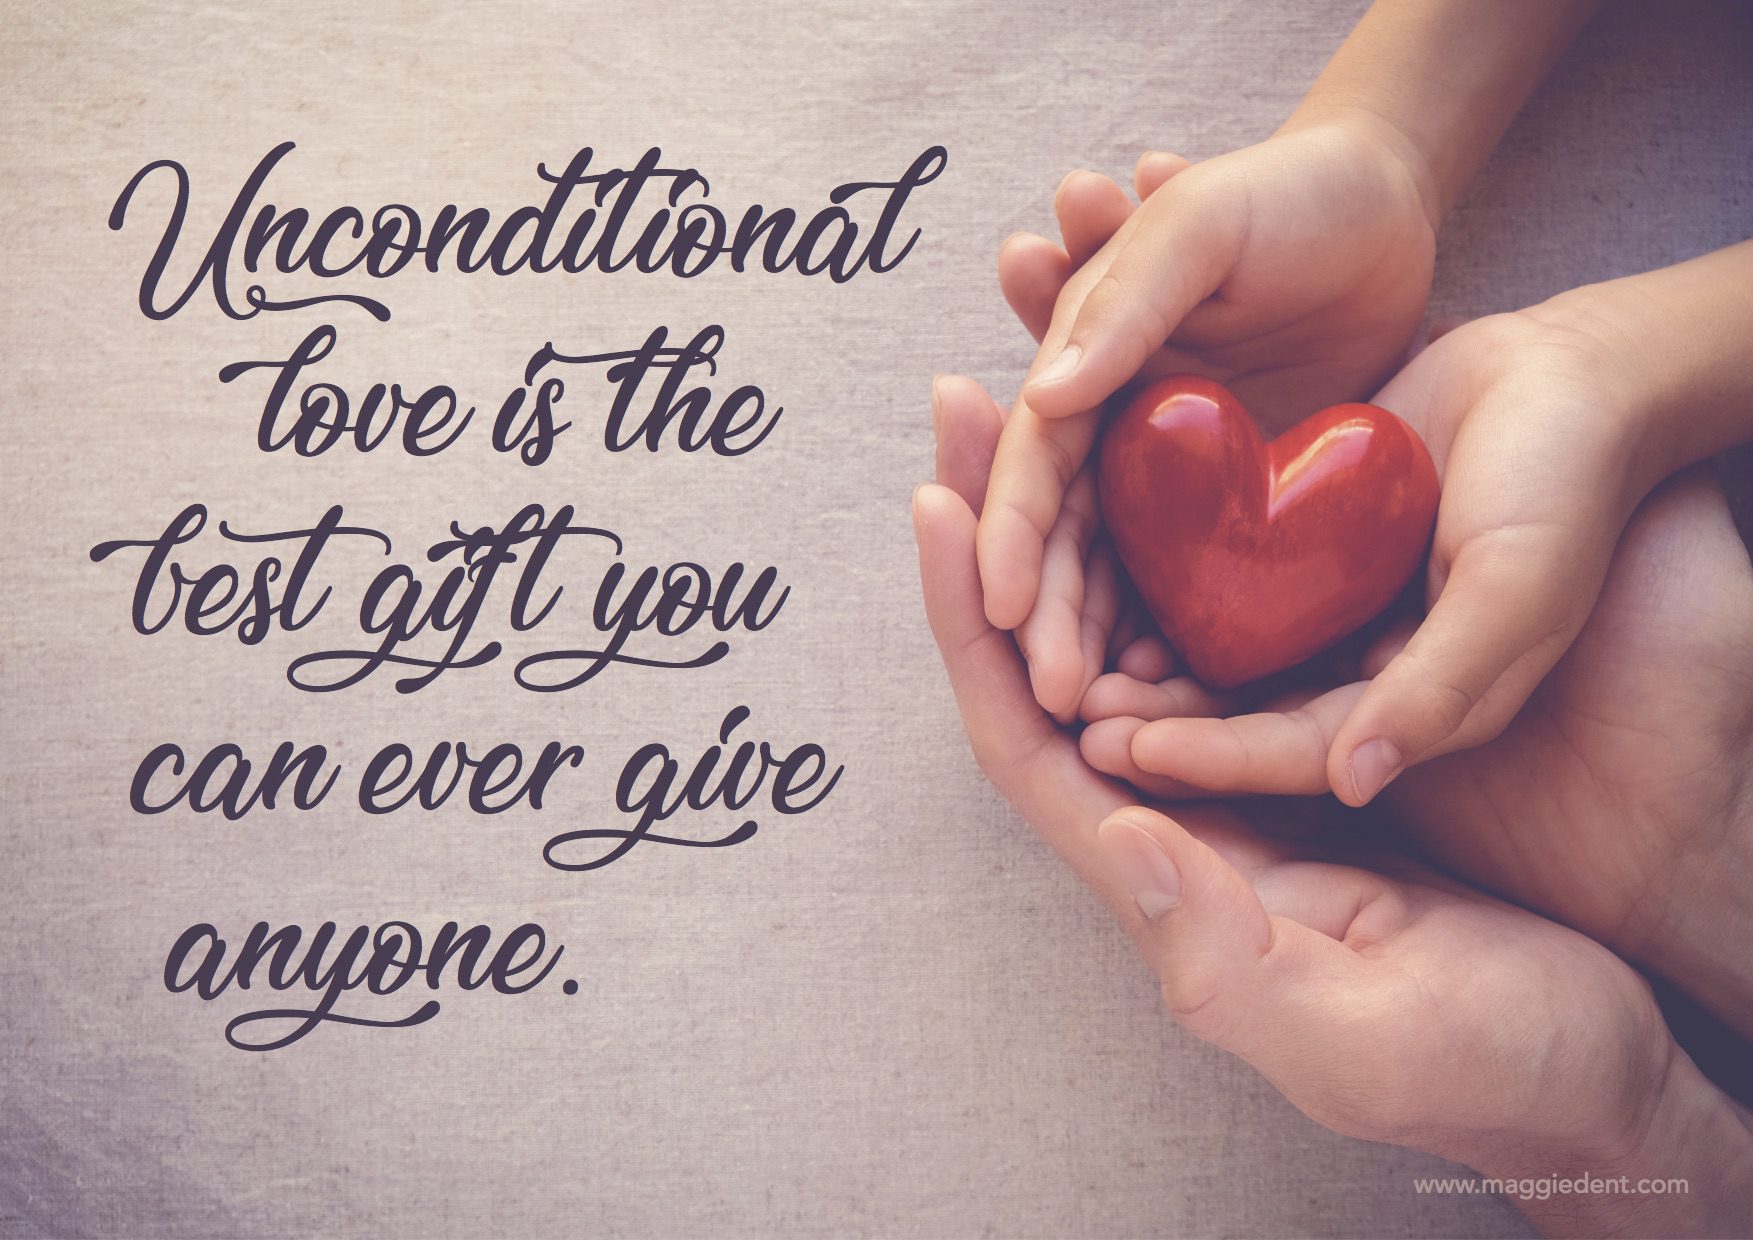 Unconditional Love Poster My Gift To You This Christmas Maggie Dent